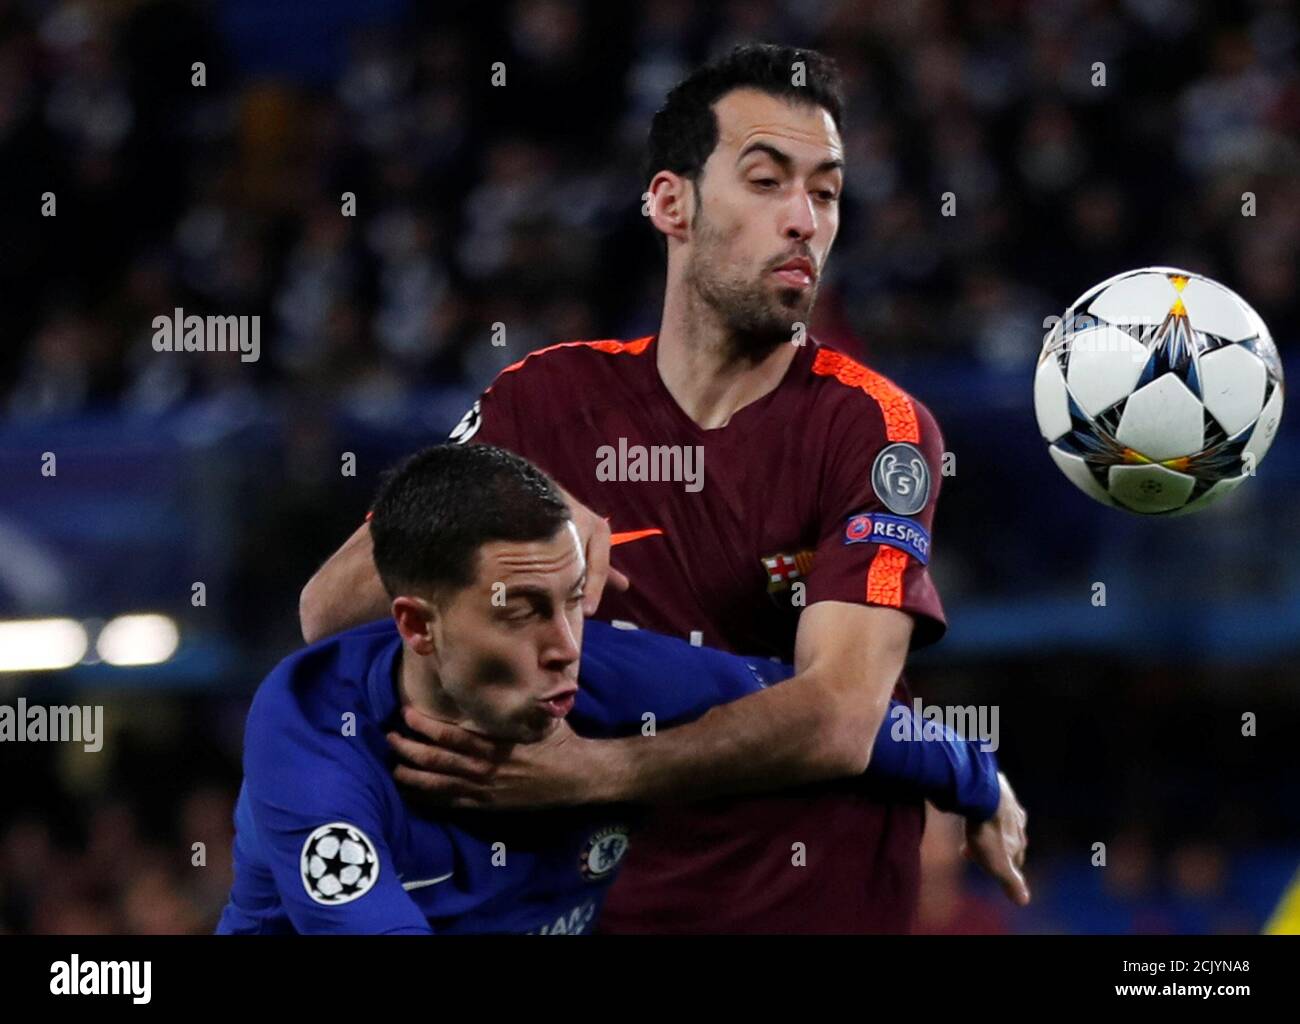 Soccer Football - Champions League Round of 16 First Leg - Chelsea vs FC Barcelona - Stamford Bridge, London, Britain - February 20, 2018   Chelsea's Eden Hazard in action with Barcelona’s Sergio Busquets    REUTERS/Eddie Keogh Stock Photo